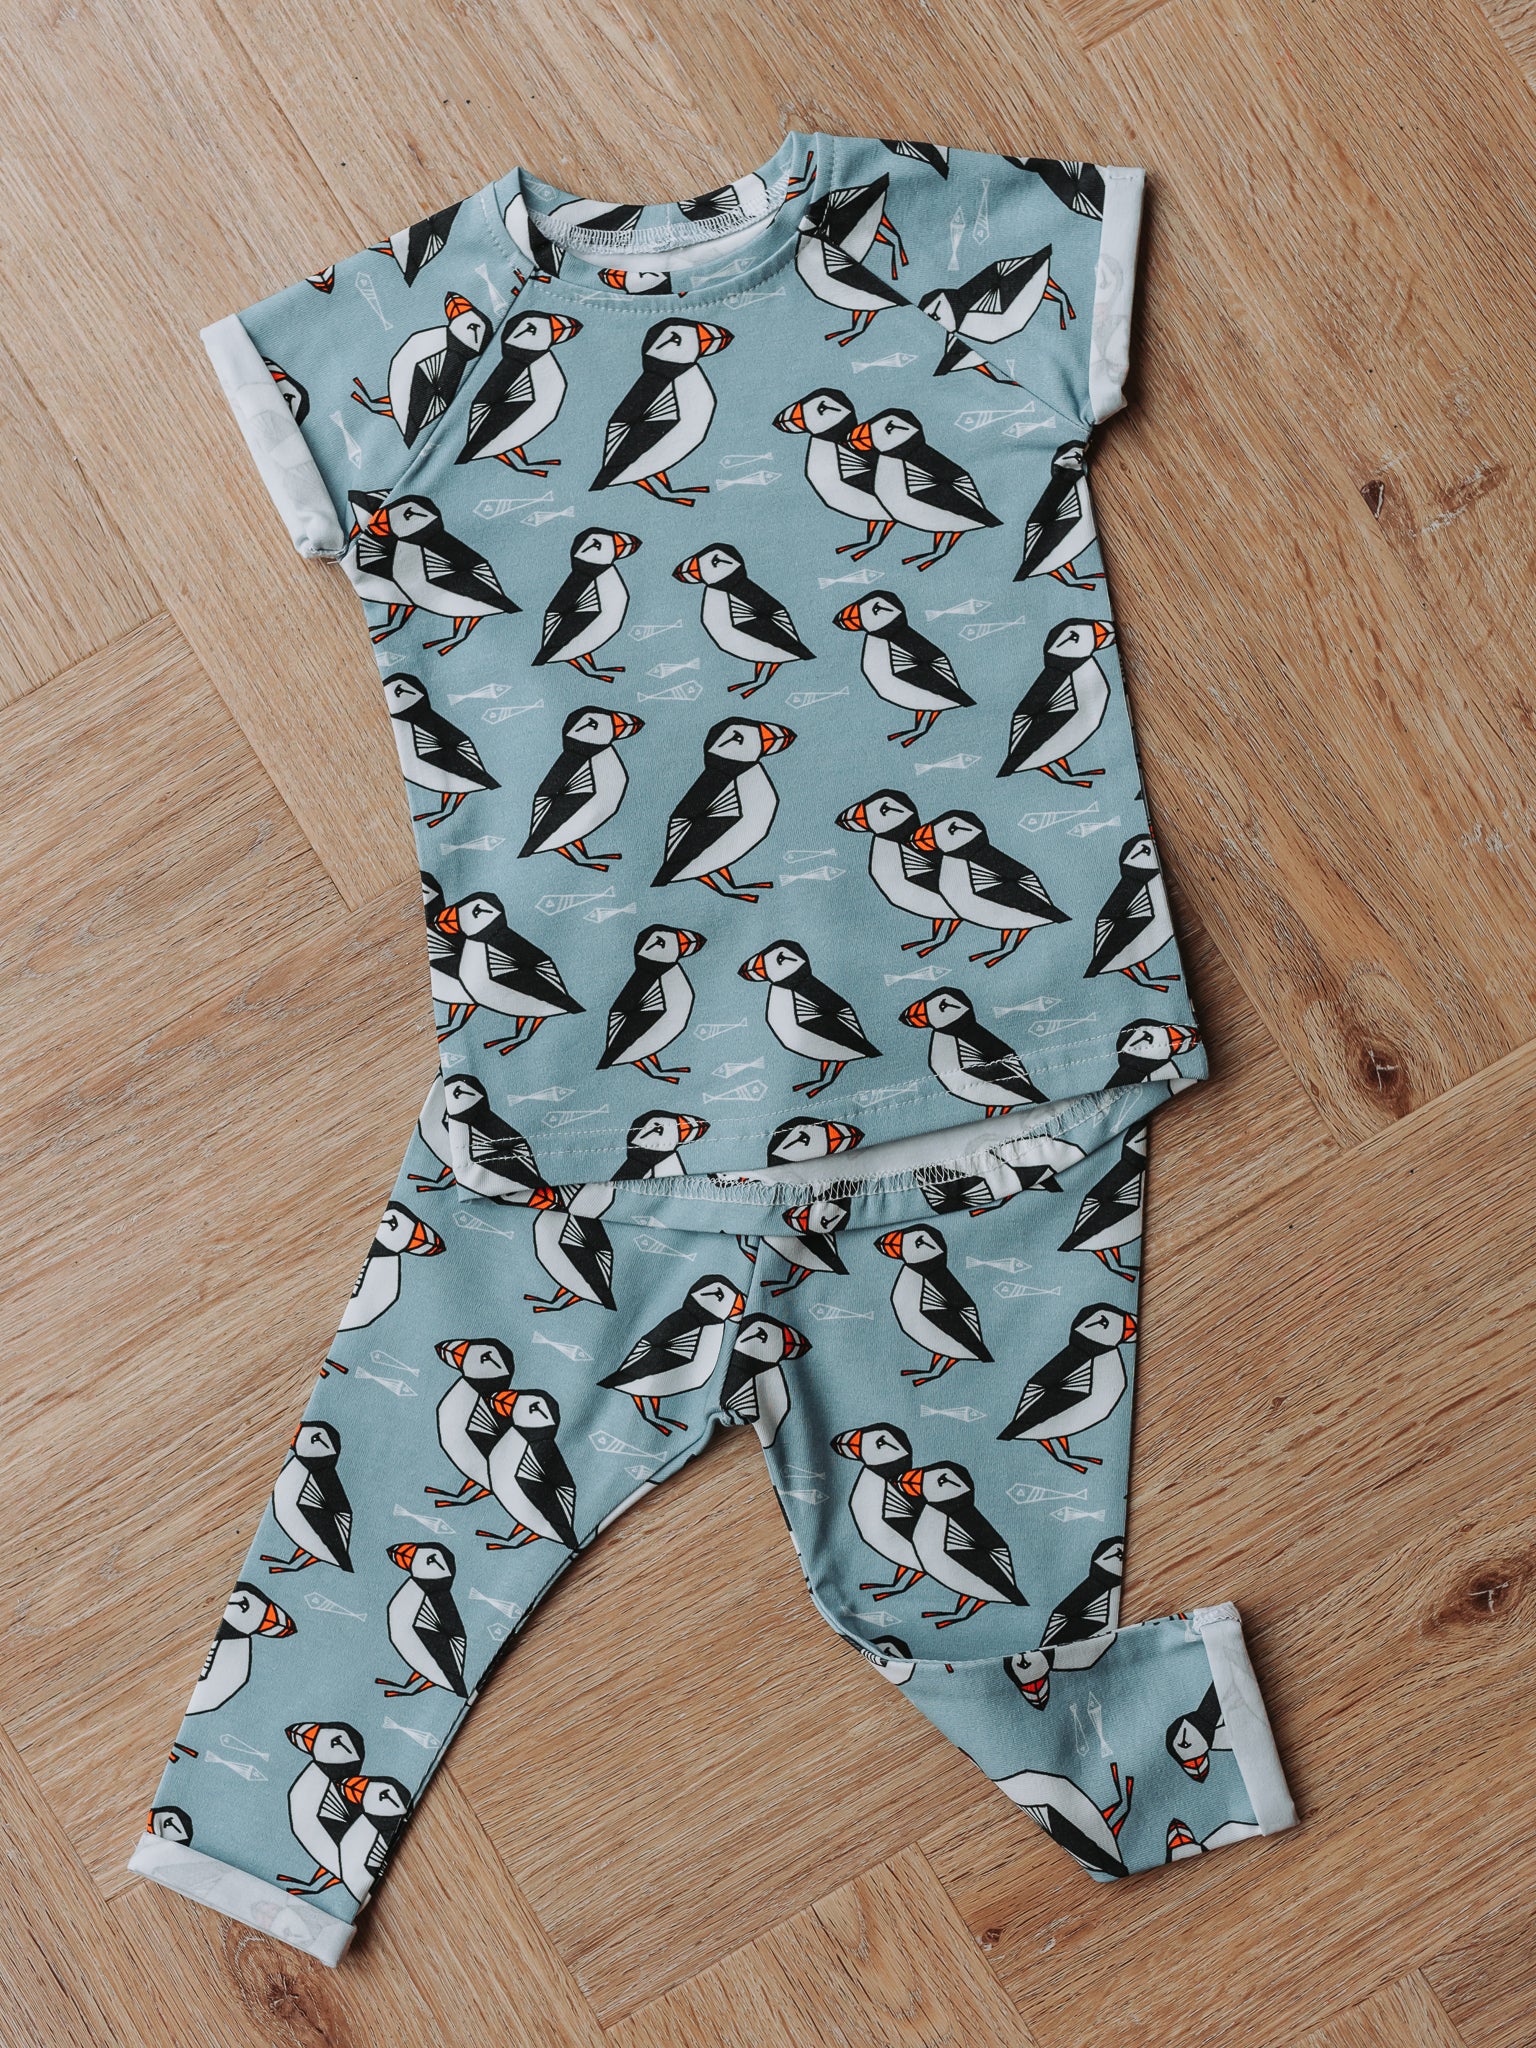 Blue Puffin Outfit Bundle